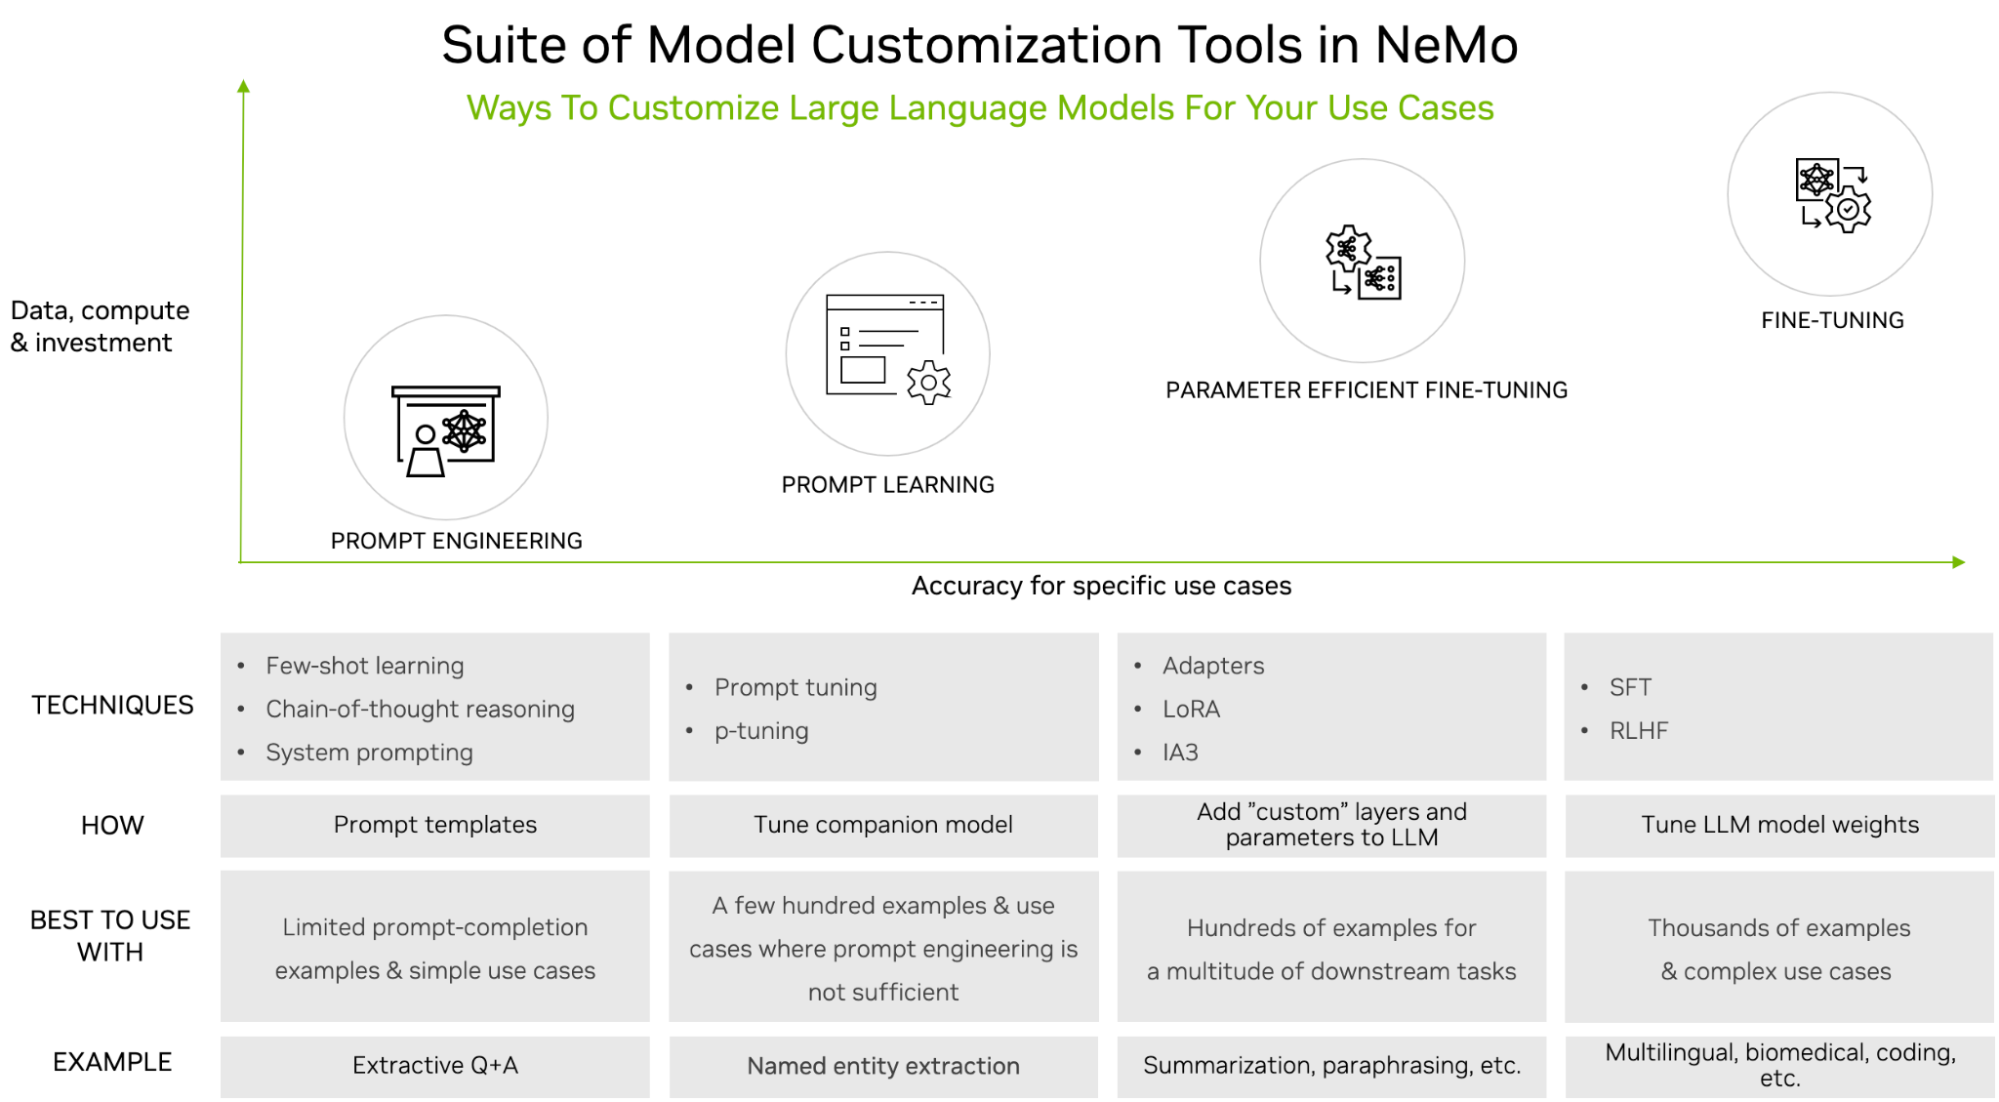 Graphic showing the suite of model customization tools in NVIDIA NeMo, with use cases and examples. 

